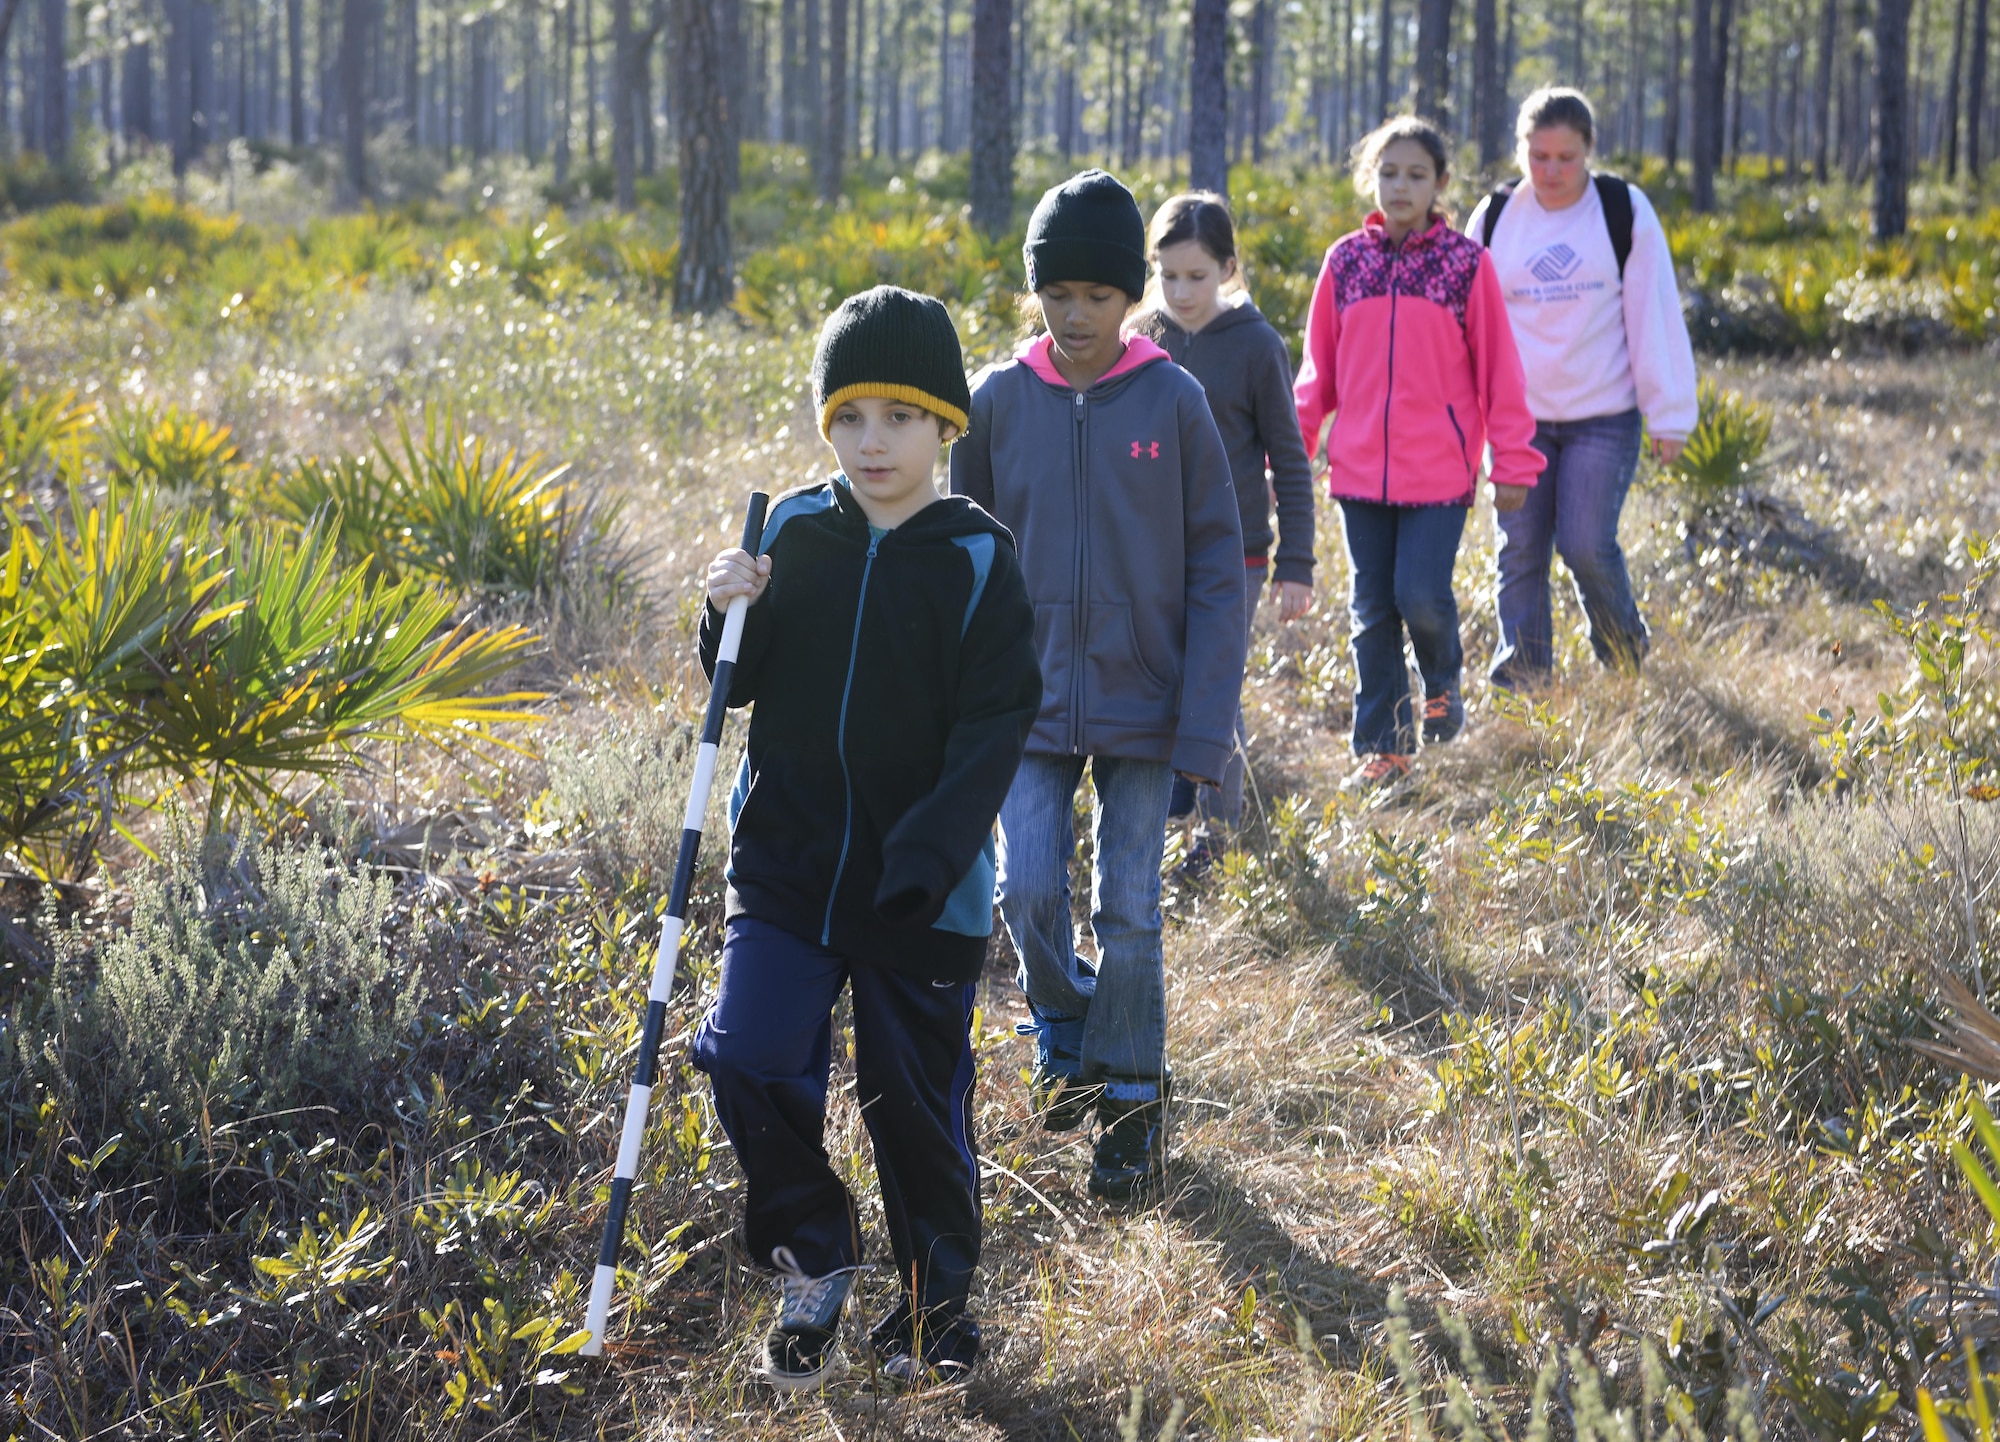 Children from the Hurlburt youth group walk towards a wildlife camera at Hurlburt Field, Fla., Feb. 5, 2015. While searching for the cameras, the children were taught about cardinal directions, vegetation identification, hydrologic indicators, wildlife signs and more. (U.S. Air Force photo Senior Airman Meagan Schutter/Released)